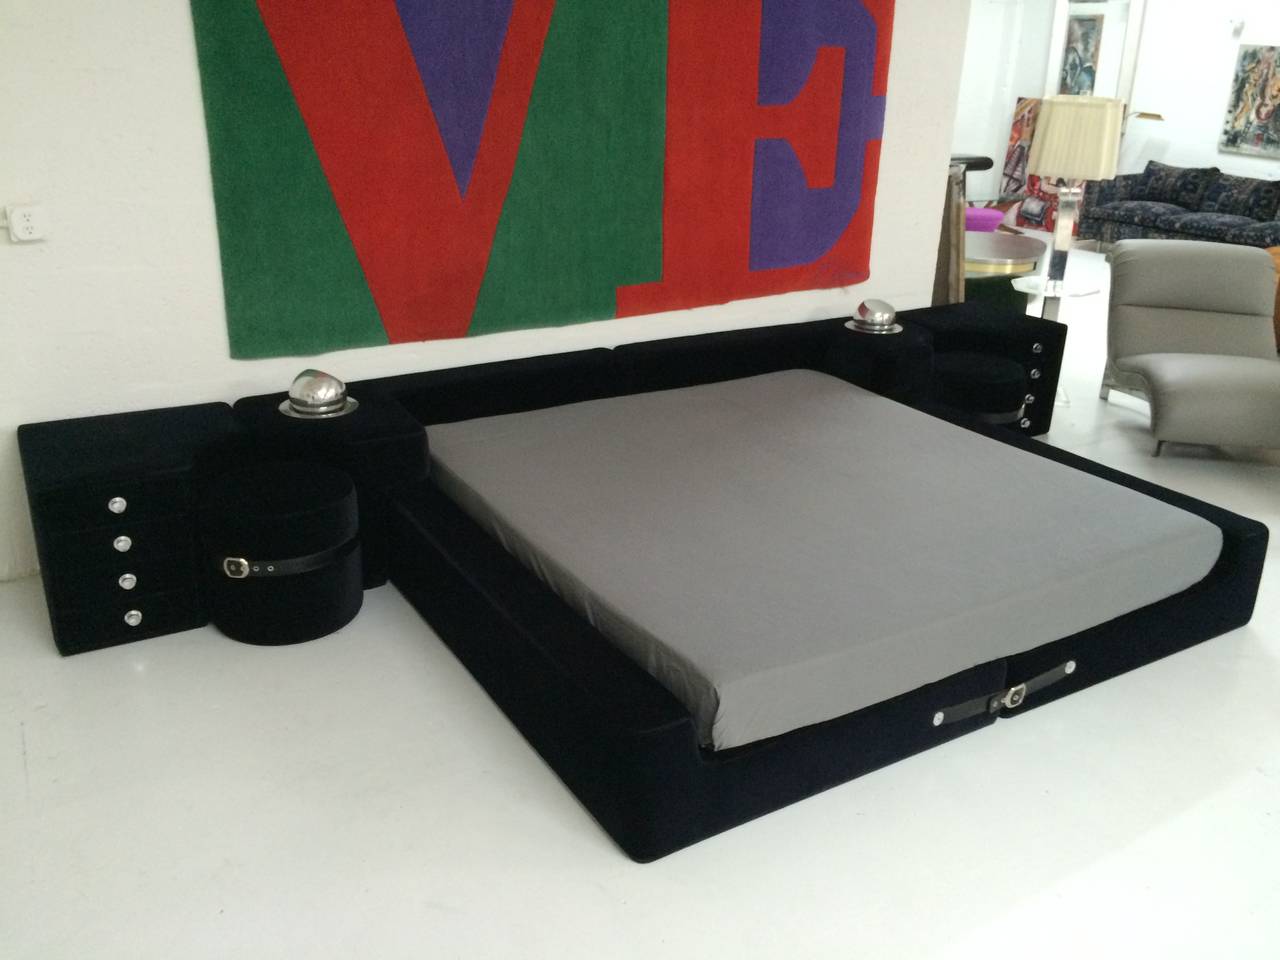 Ink colored (blue-black) velvet king-size bed designed by Guido Faleschini and manufactured by i4 Mariani exclusively for the Pace collection, with black leather straps and chrome buckles, integrated nightstands, ottomans, and lights.